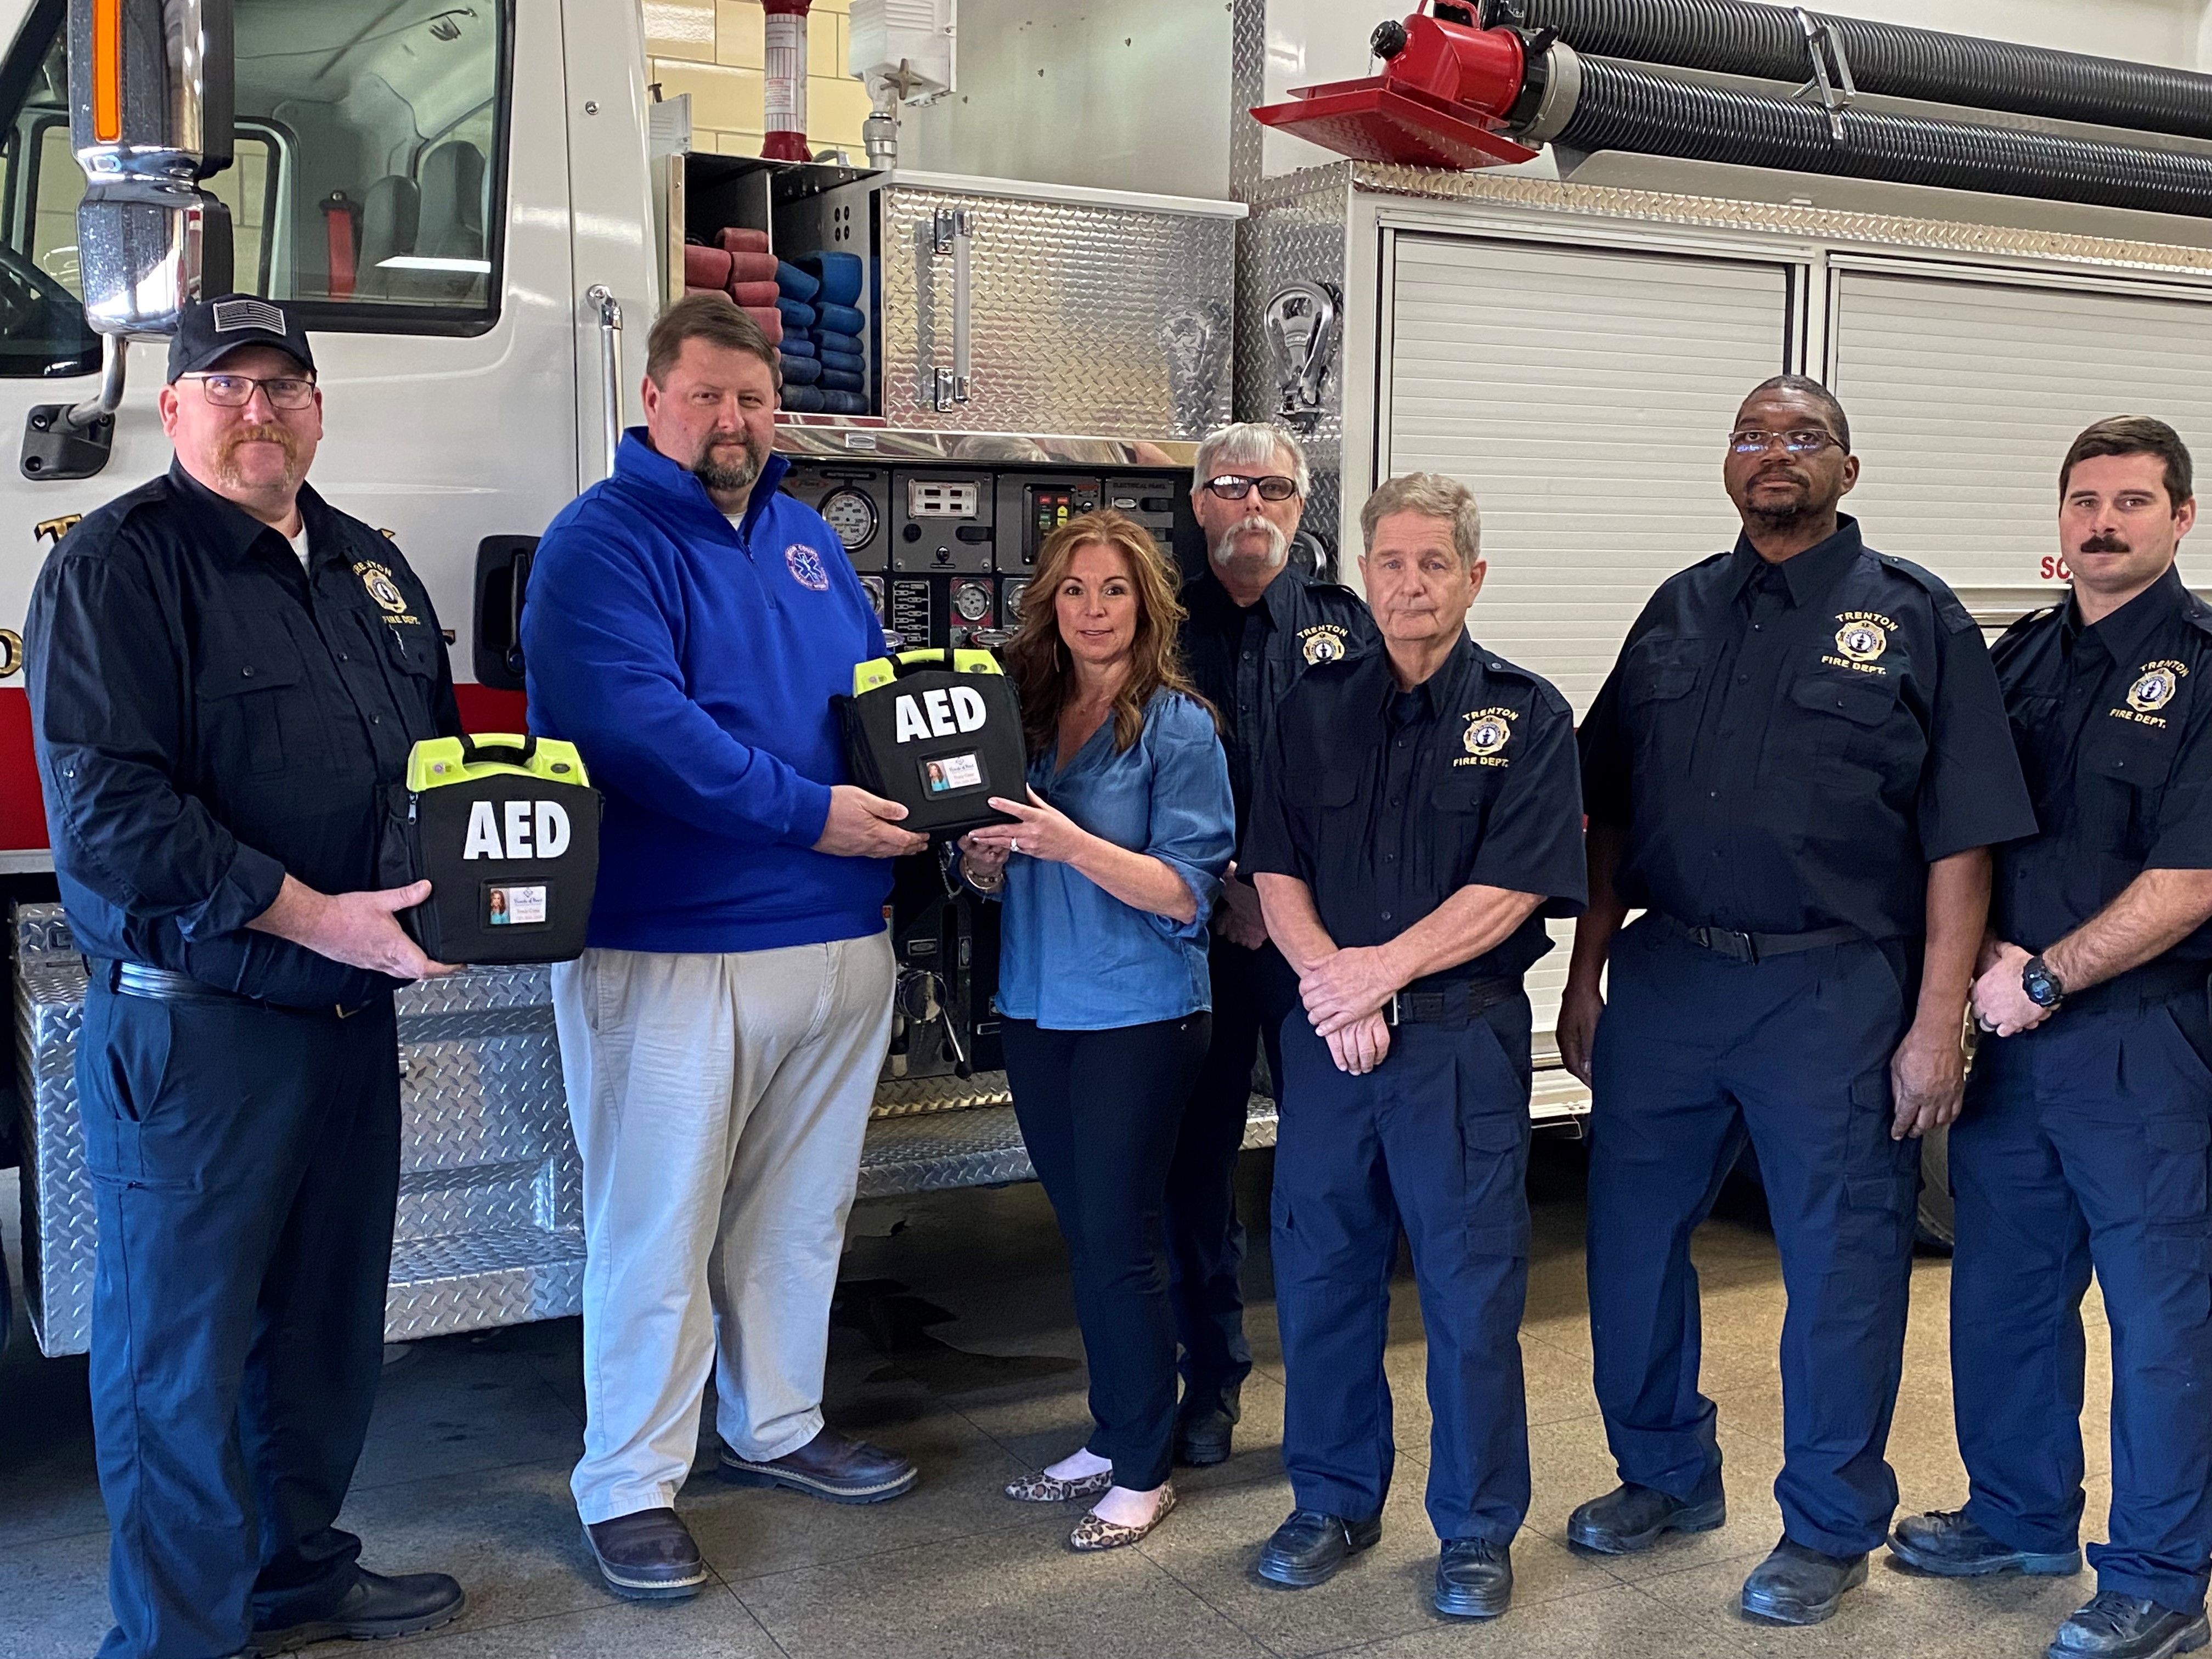 Donating AEDs to Trenton Fire Department First Responders Unit